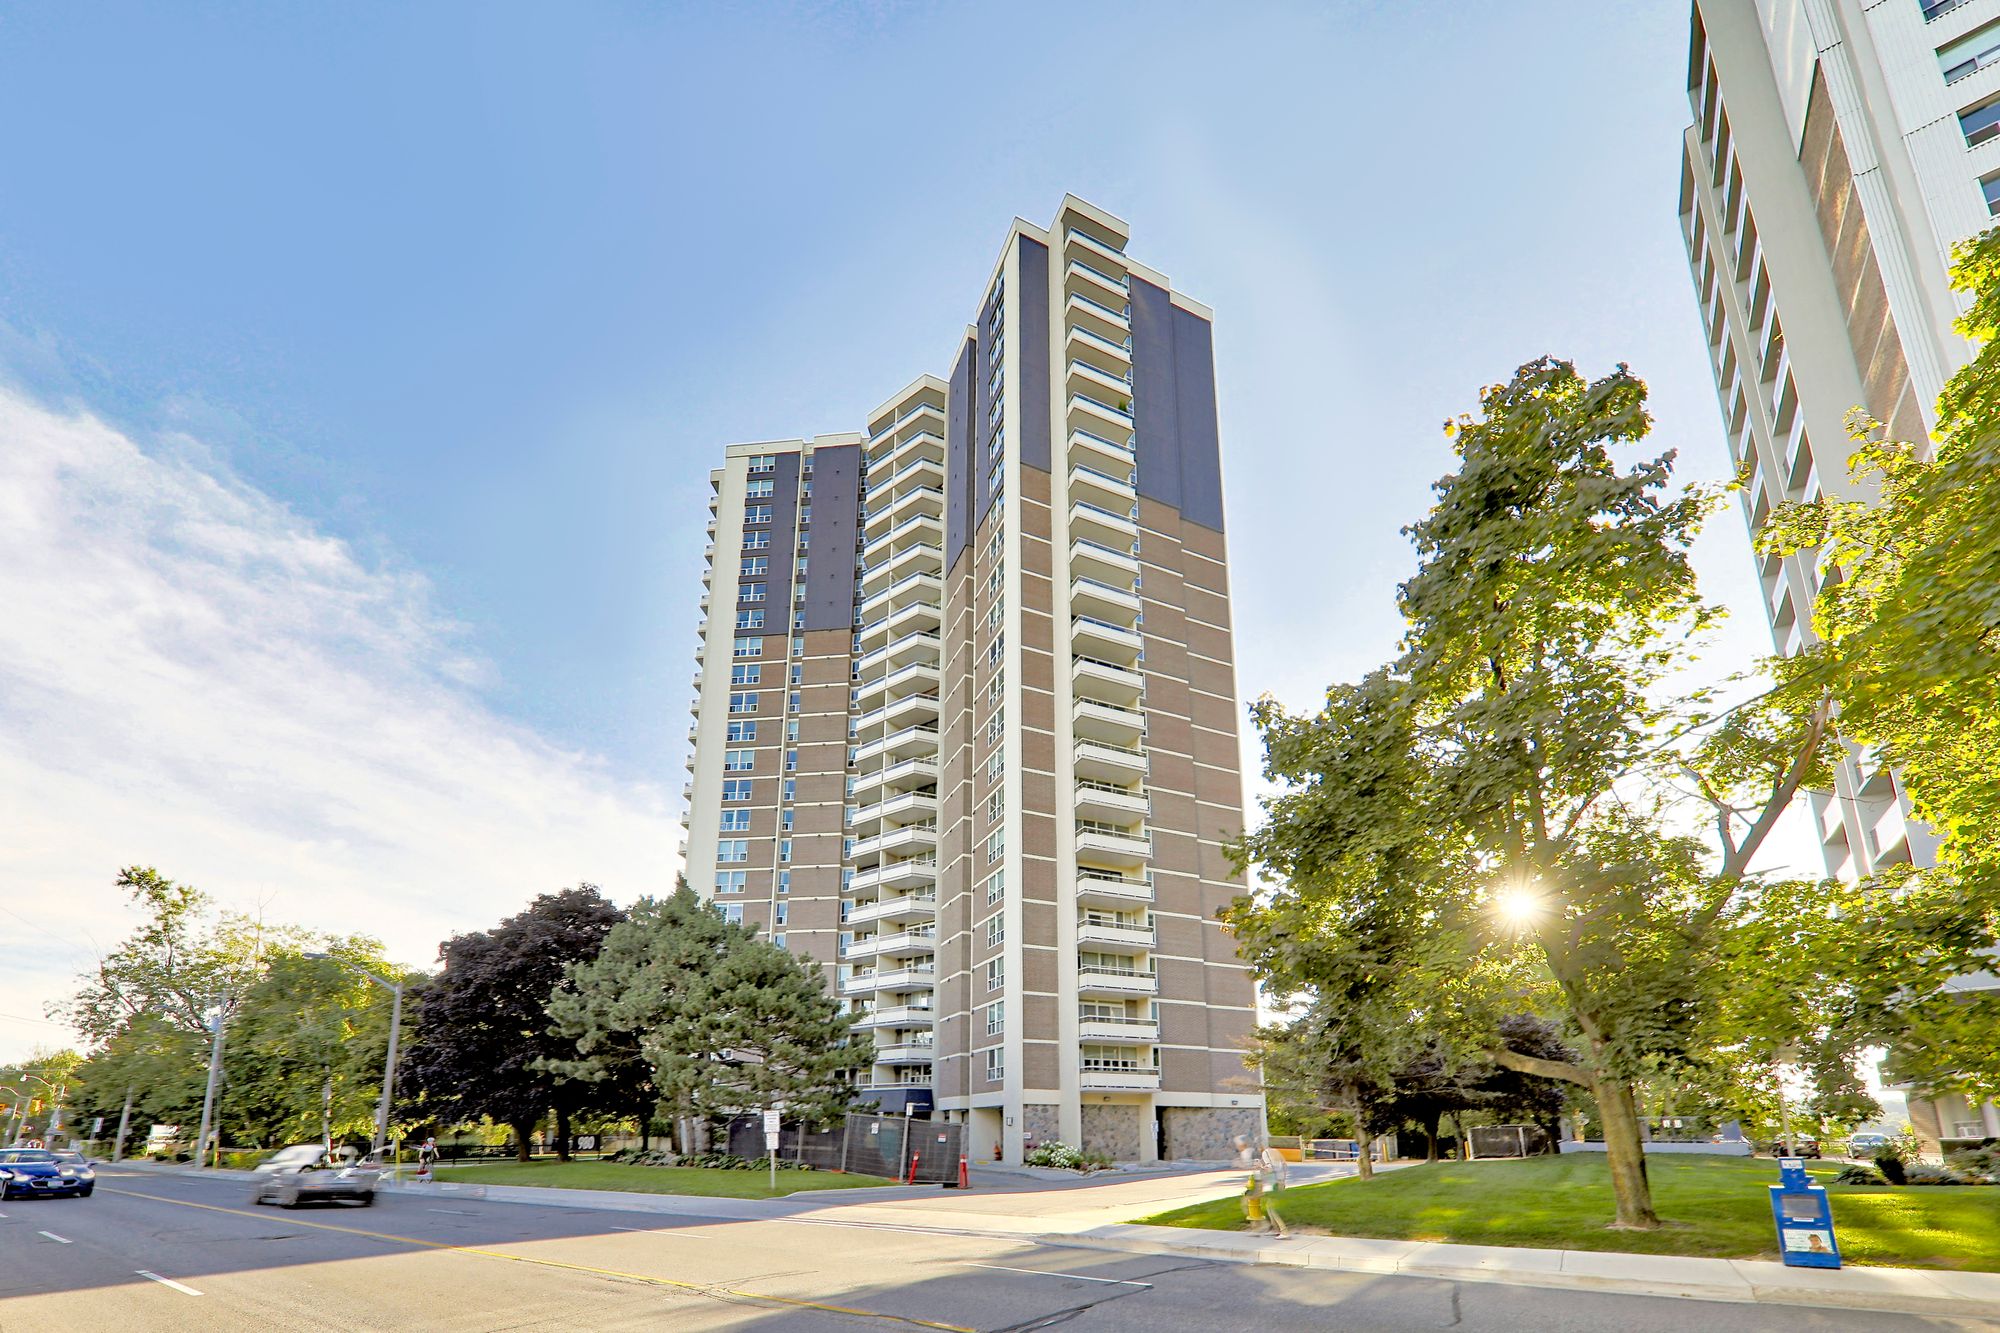 980 Broadview Ave. This condo at Helliwell Place is located in  East York, Toronto - image #1 of 7 by Strata.ca